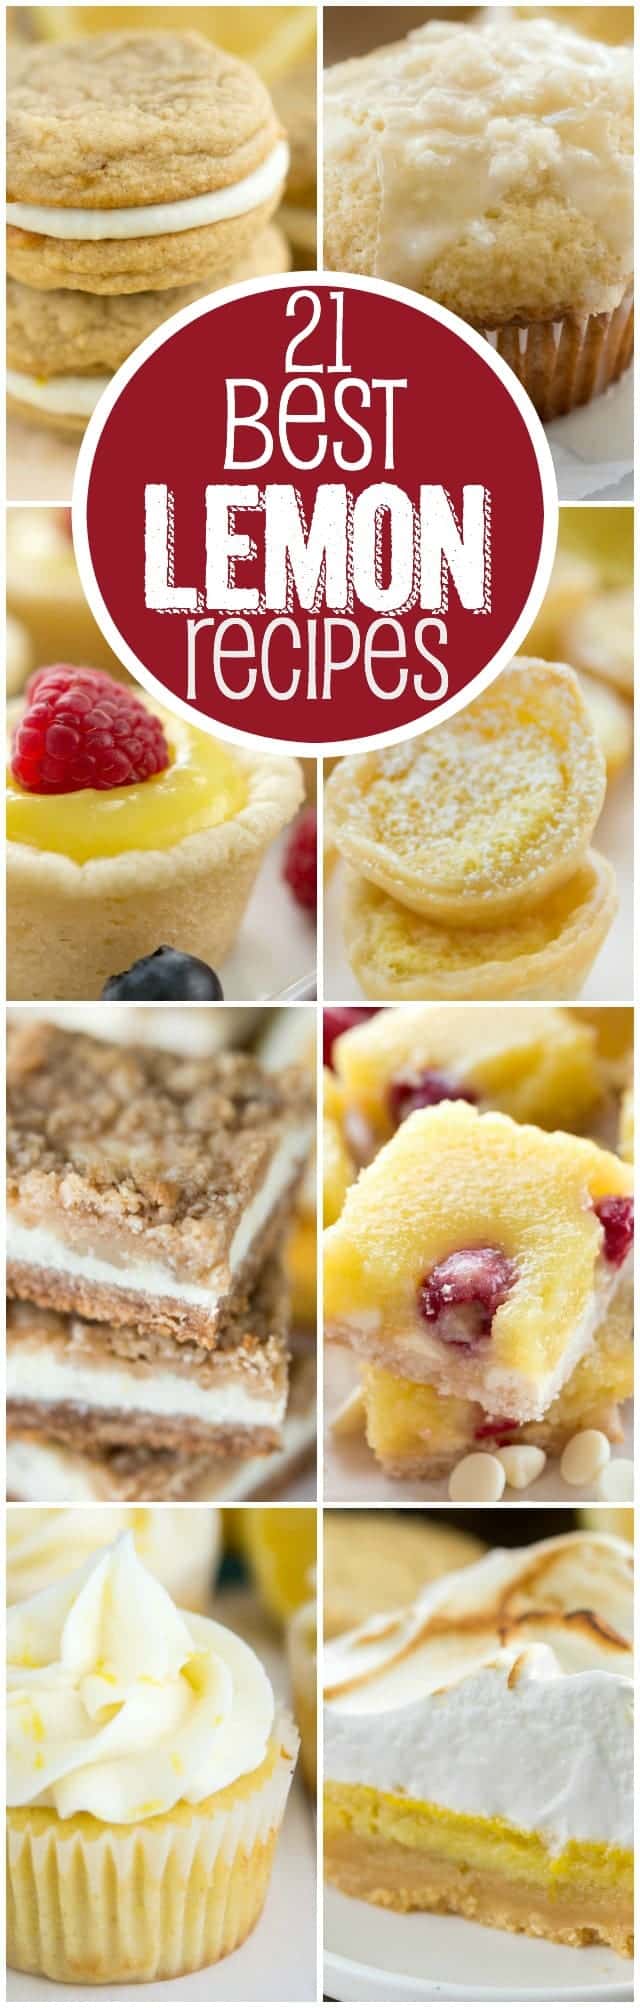 These are the 21 BEST Lemon Dessert Recipes! From lemon cupcakes to cheesecake, pie, muffins and more you'll find something LEMON you LOVE!